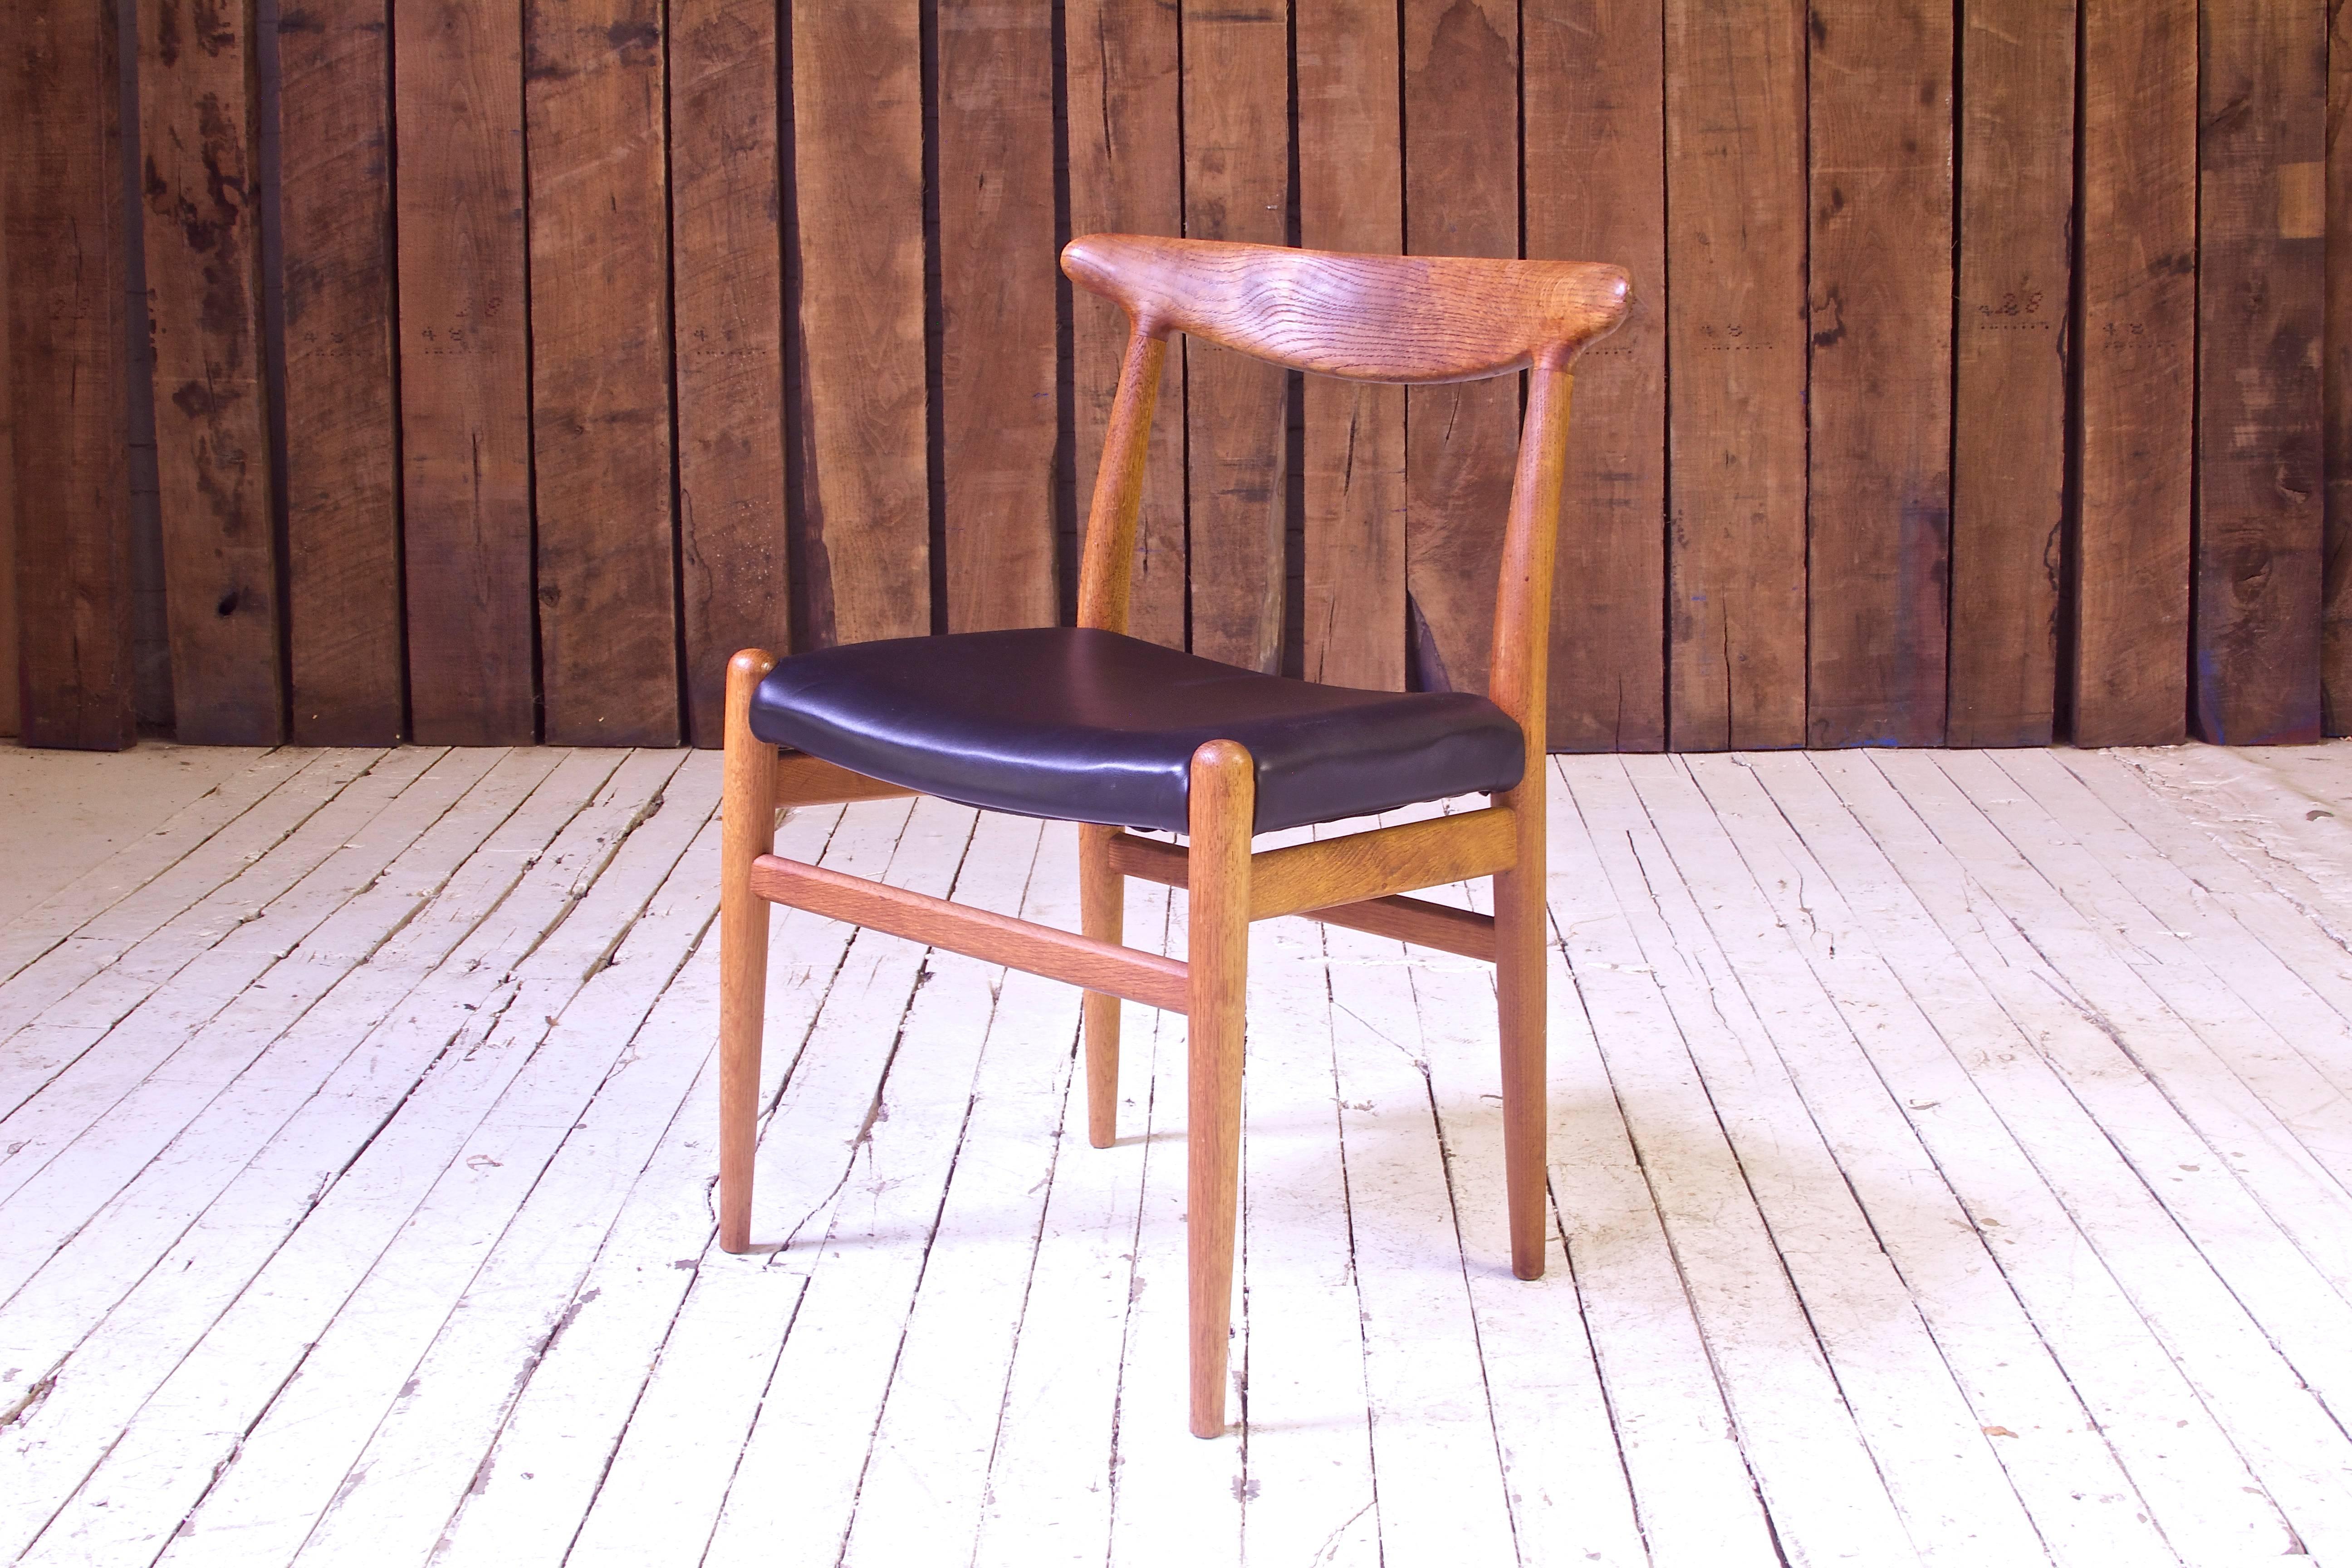 A lovely example of the early work of the 20th century's master of seating design, Hans J. Wegner. The sculpted oak backrest or top-rail employed here was developed as part of a family of innovative seating designs of the 1950s including Wegner's